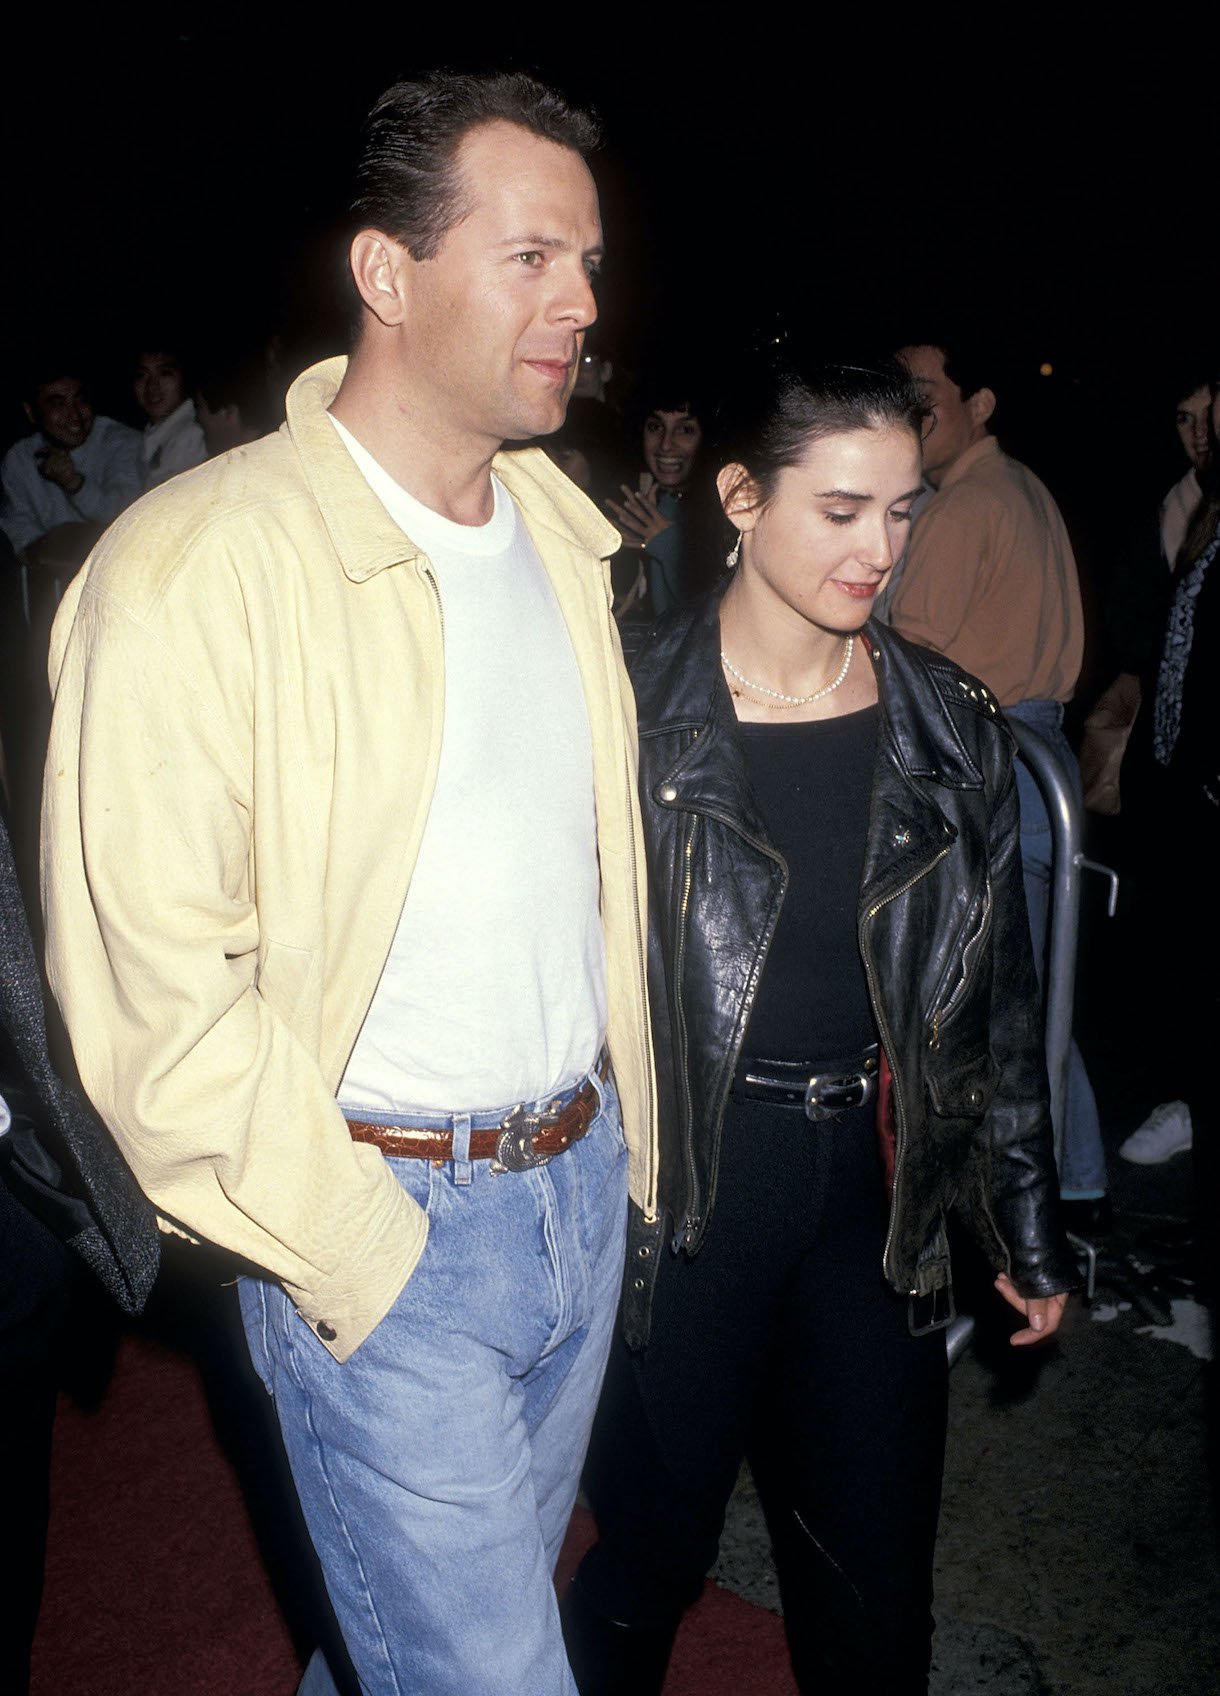 Bruce Willis and actress Demi Moore